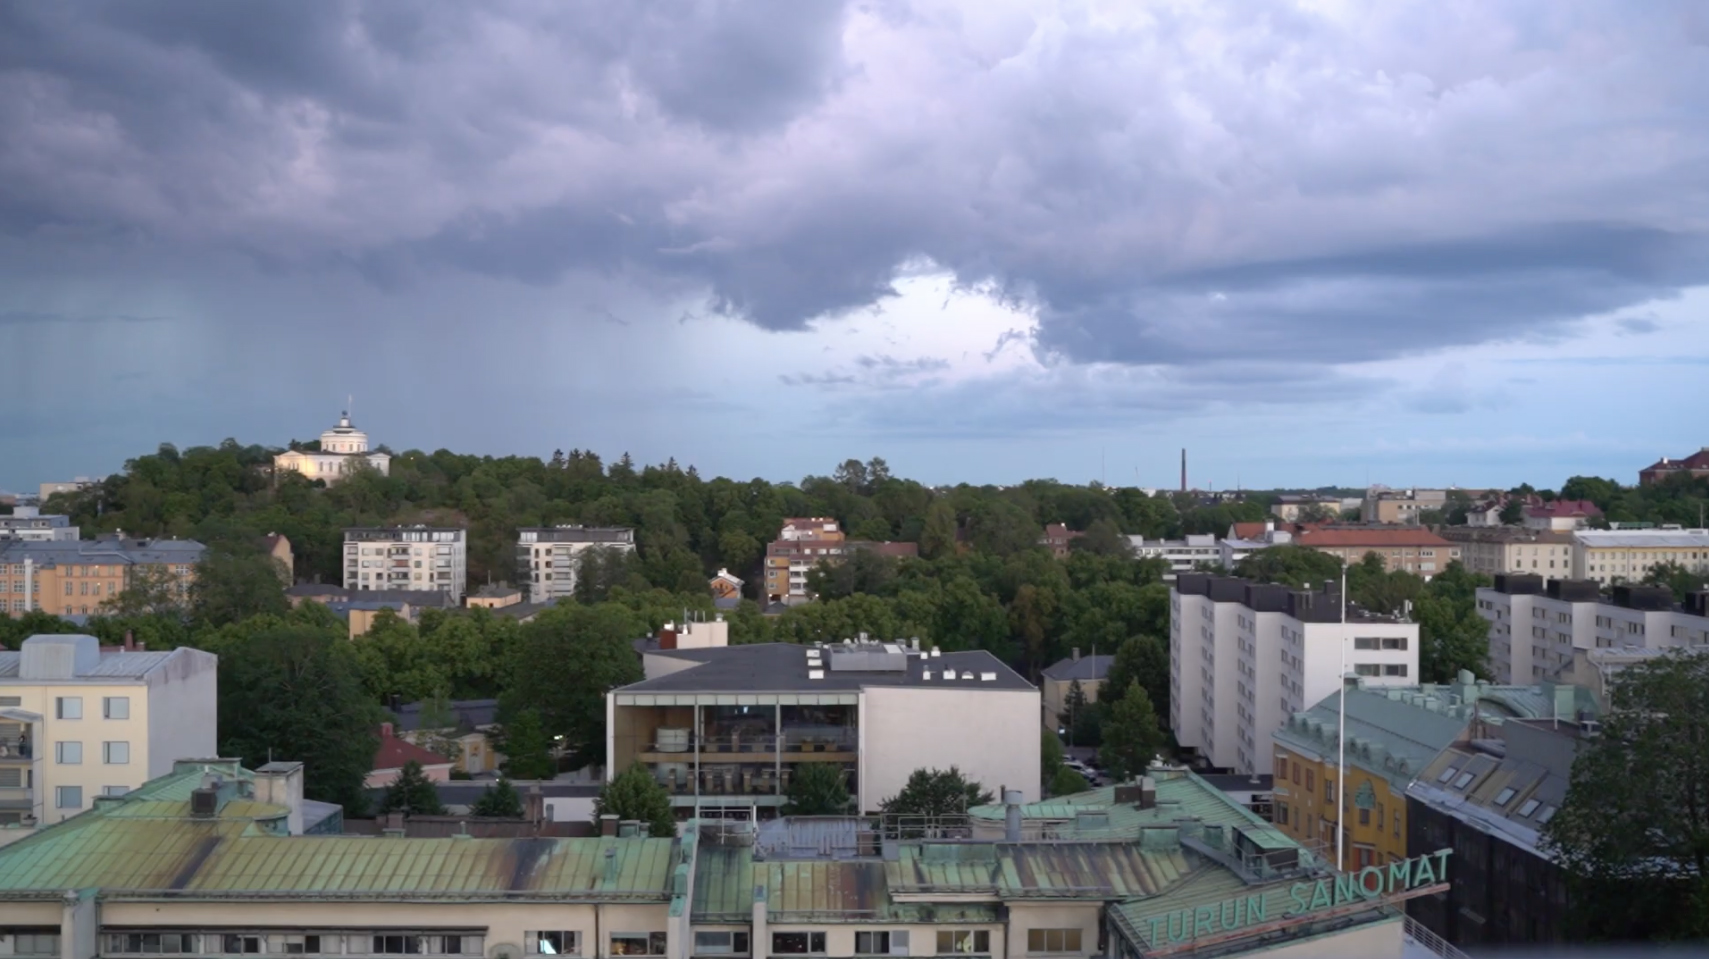 Chapter 4: A View from Turku